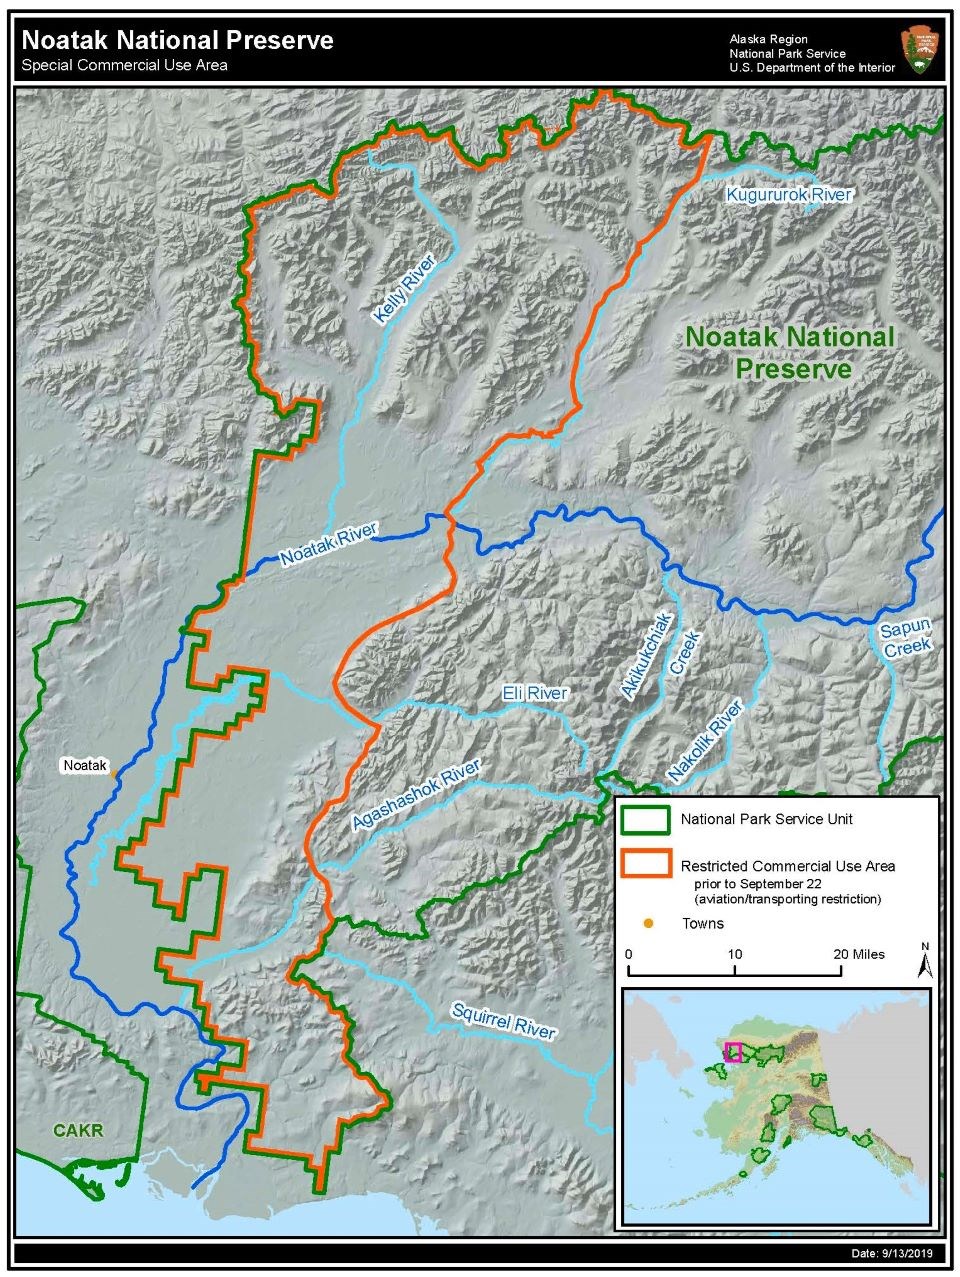 Noatak National Preserve Special Commercial Use Area Map